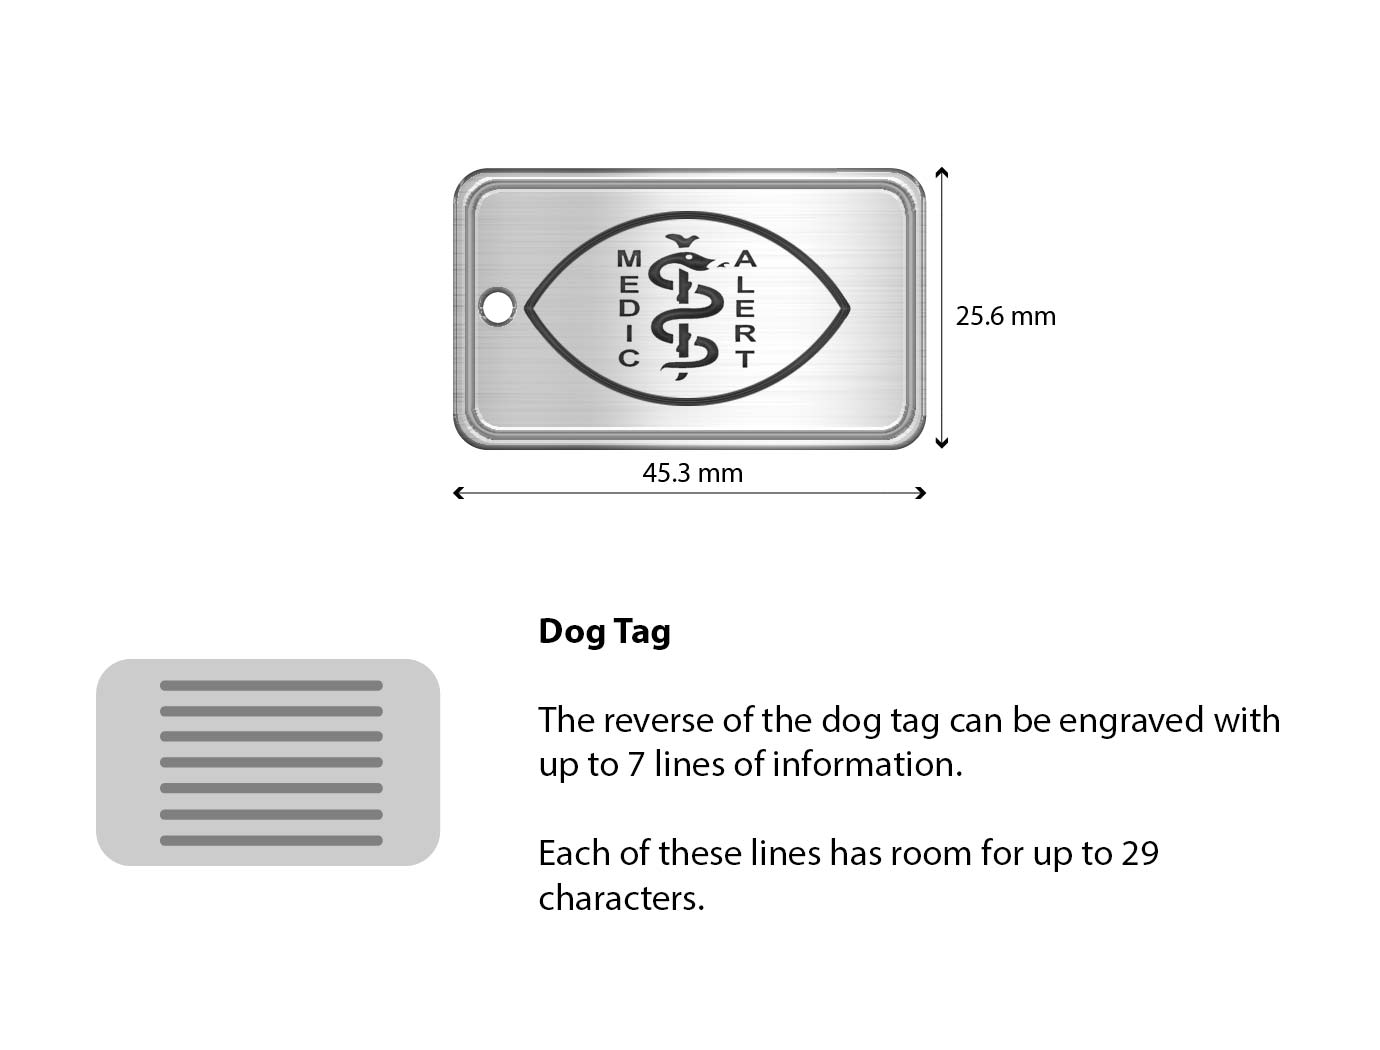 Diagram of the MedicAlert stainless steel dog tag disk with measurements and descriptions of the engraving specifications